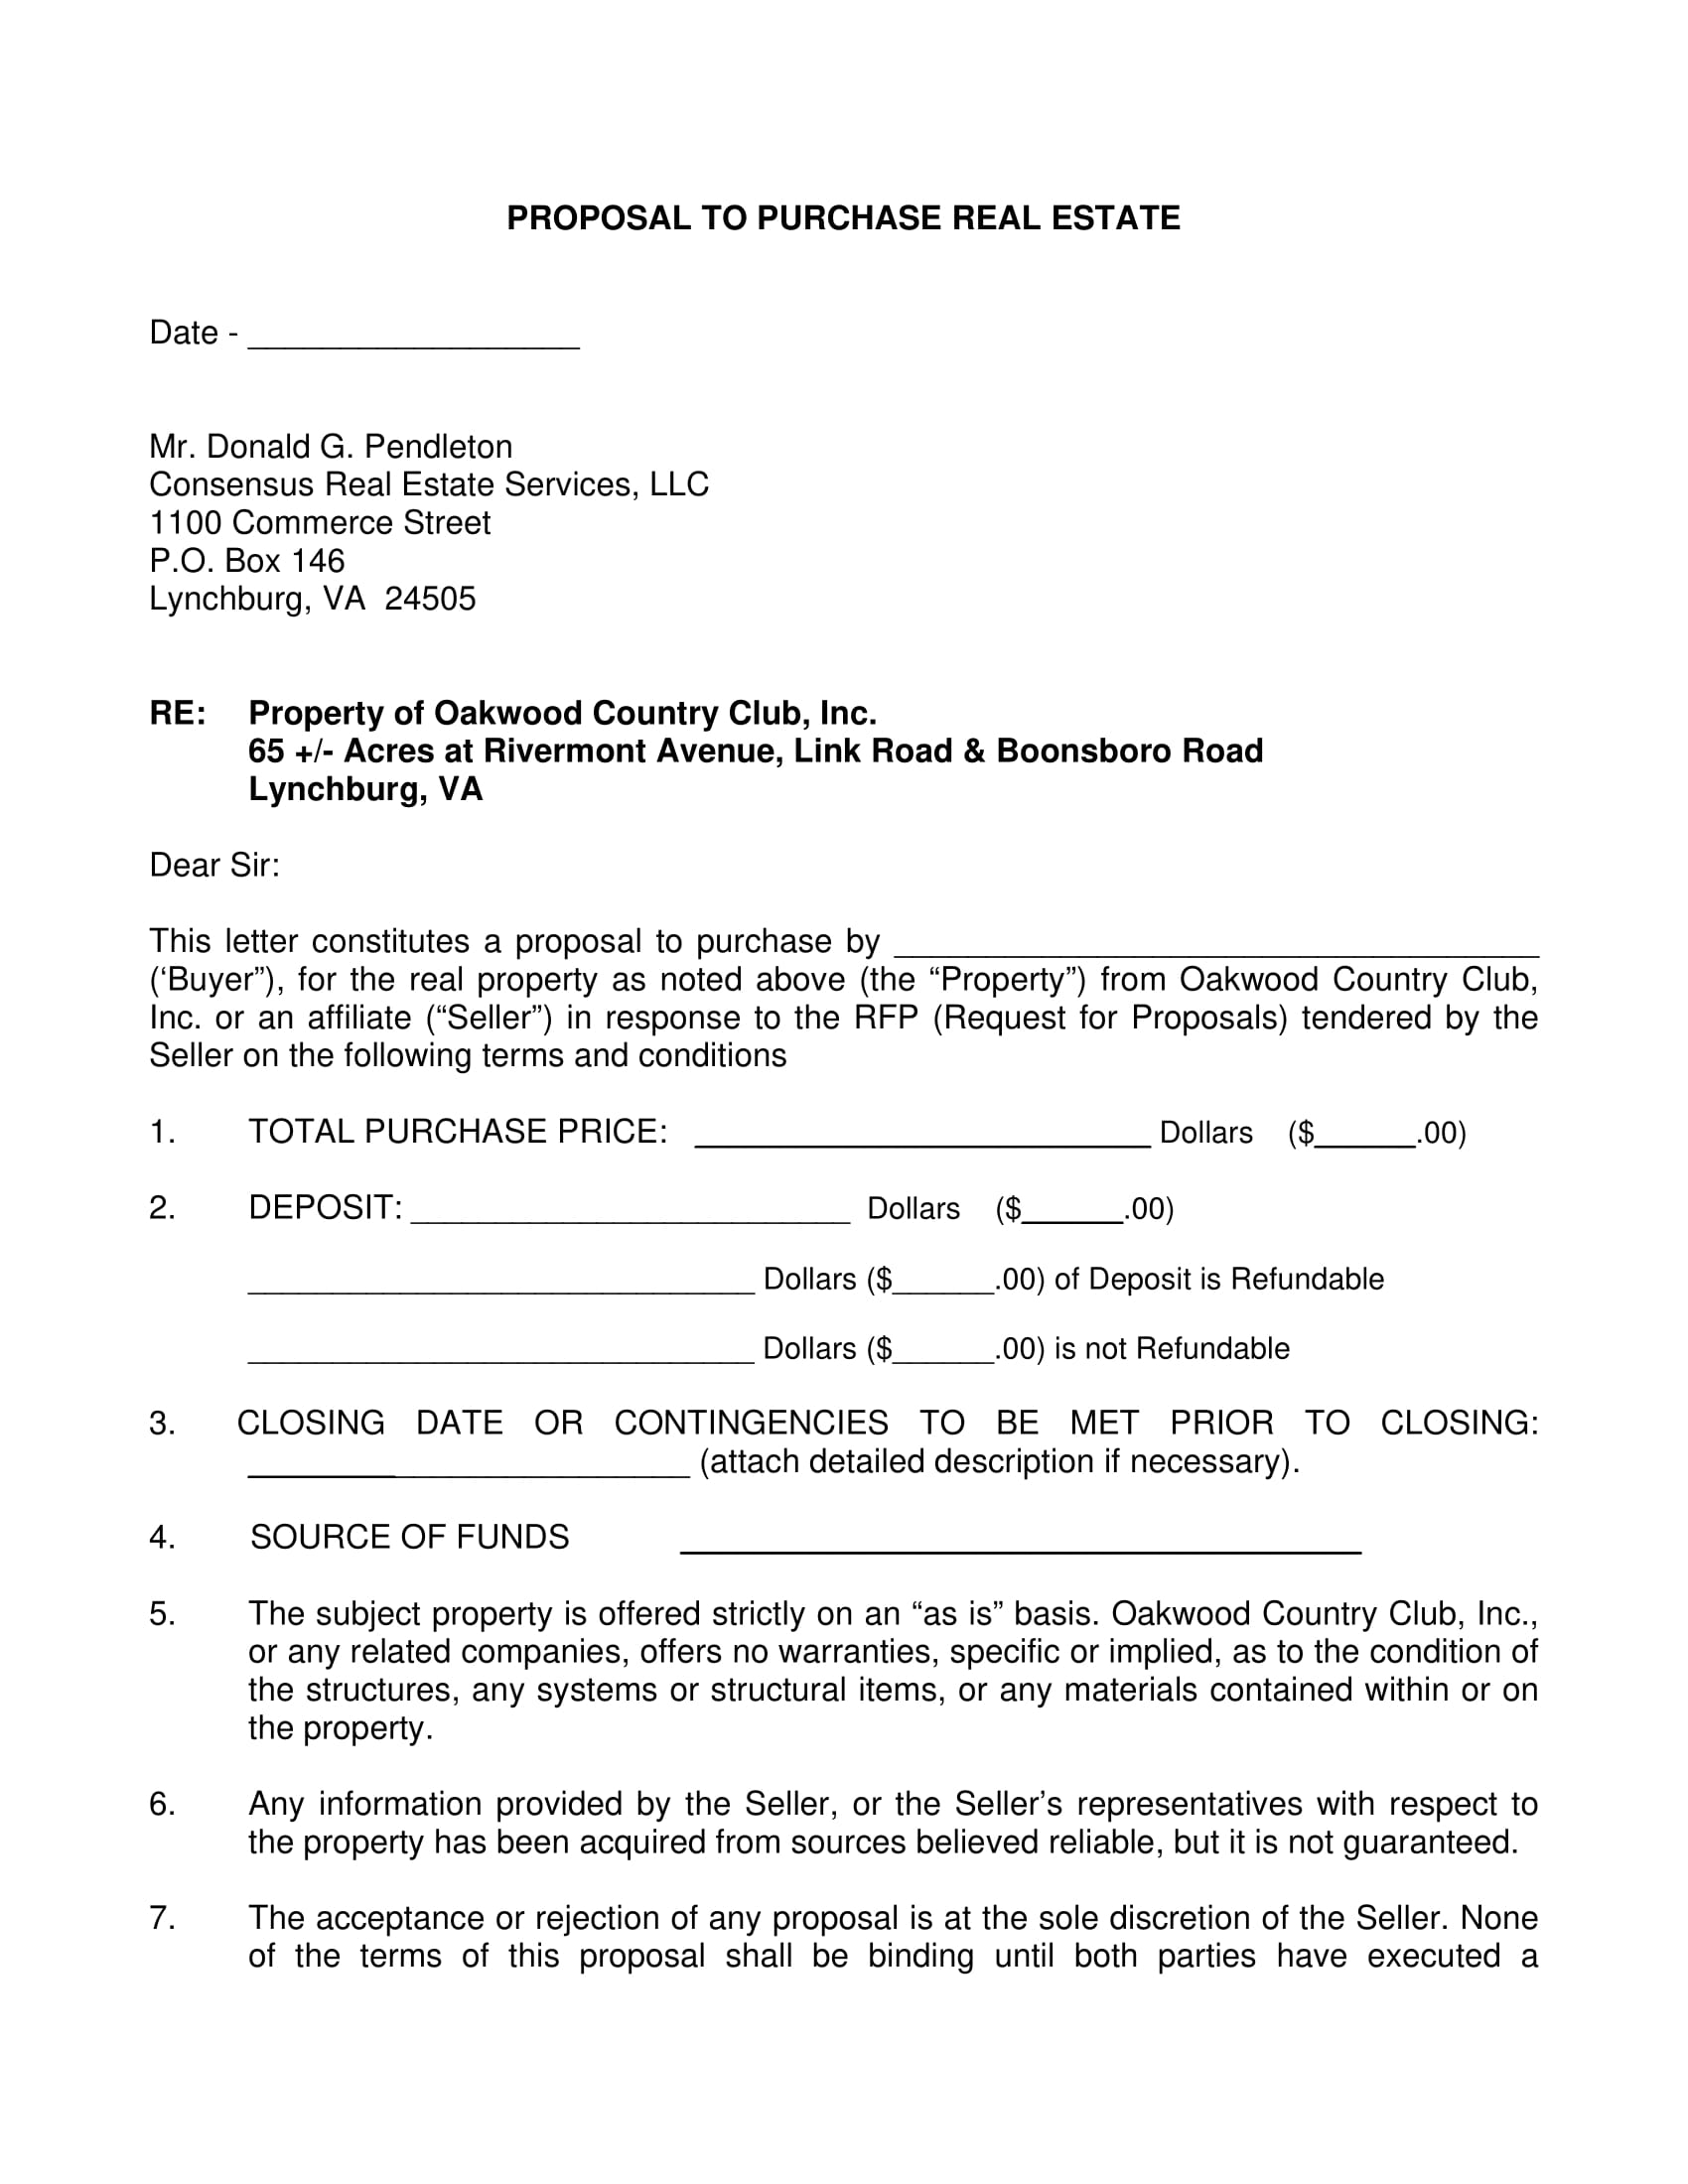 Purchase proposal example! What Is an Example of an Informal Inside Equipment Proposal Template